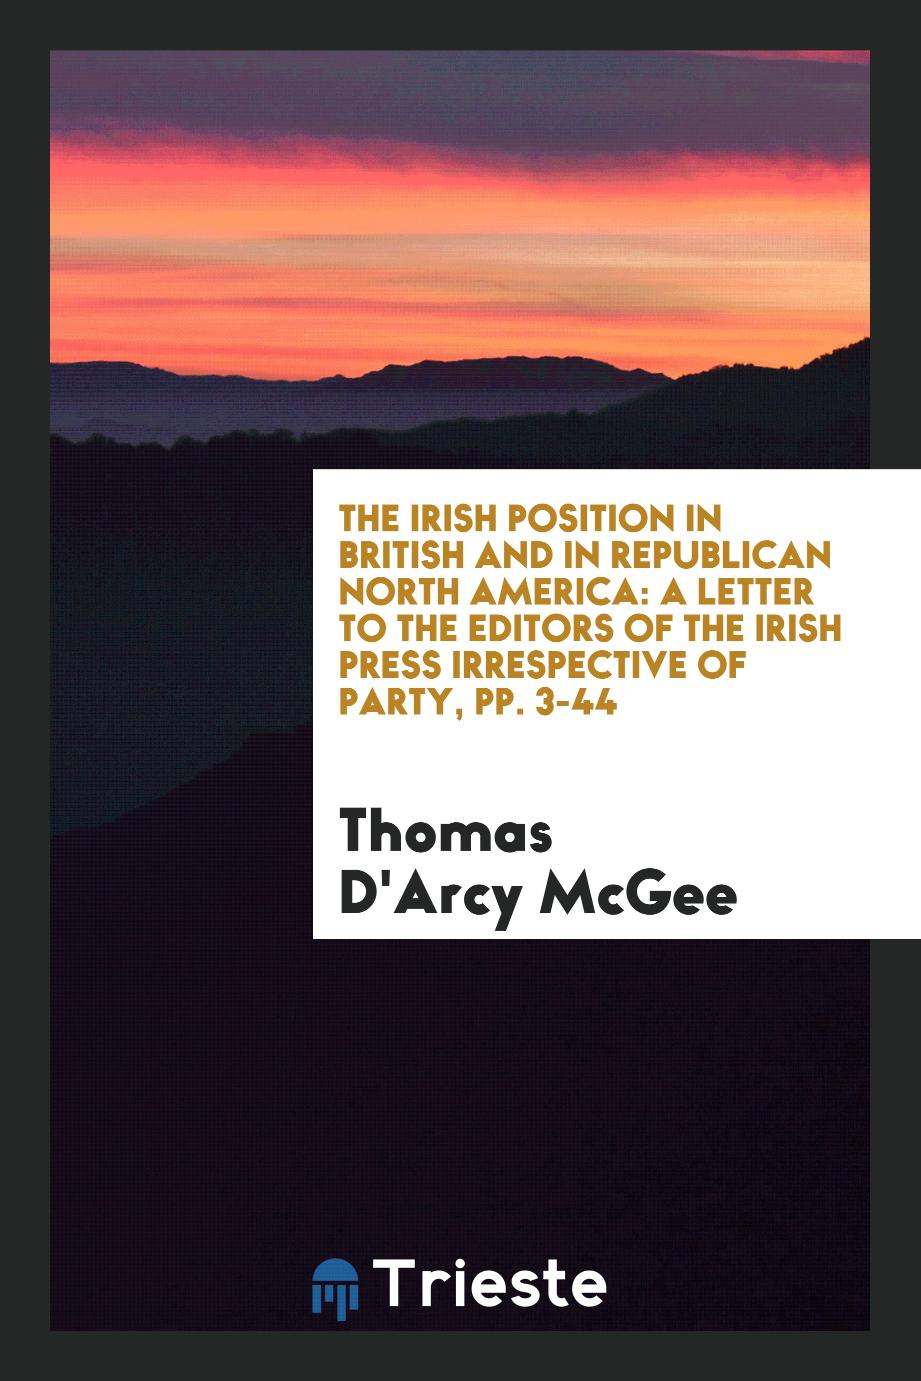 The Irish Position in British and in Republican North America: A Letter to the Editors of the Irish Press Irrespective of Party, pp. 3-44